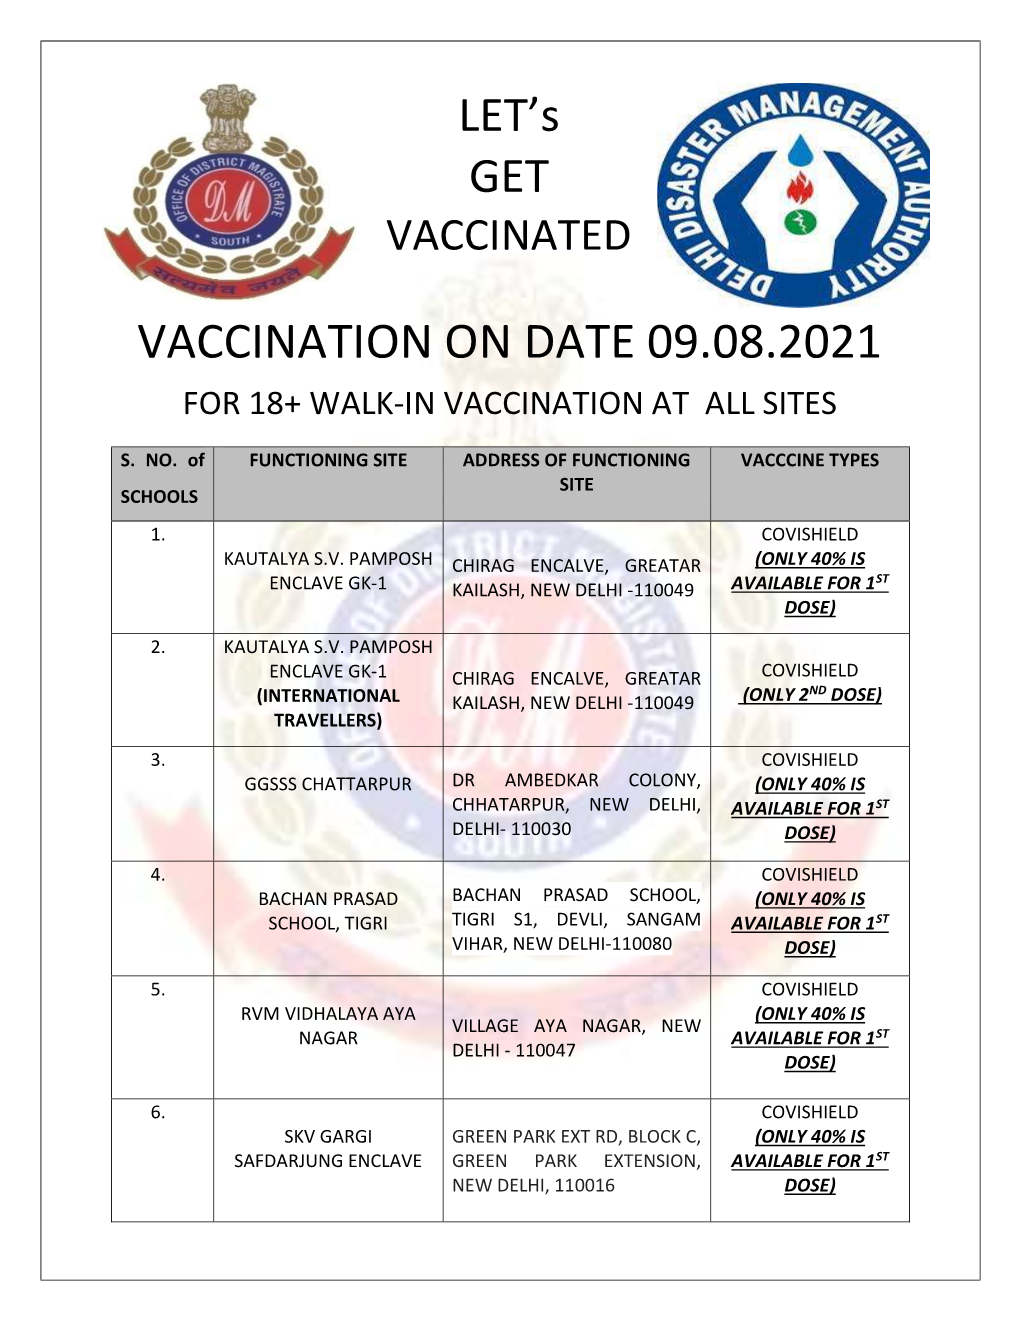 Vaccination on Date 09.08.2021 for 18+ Walk-In Vaccination at All Sites